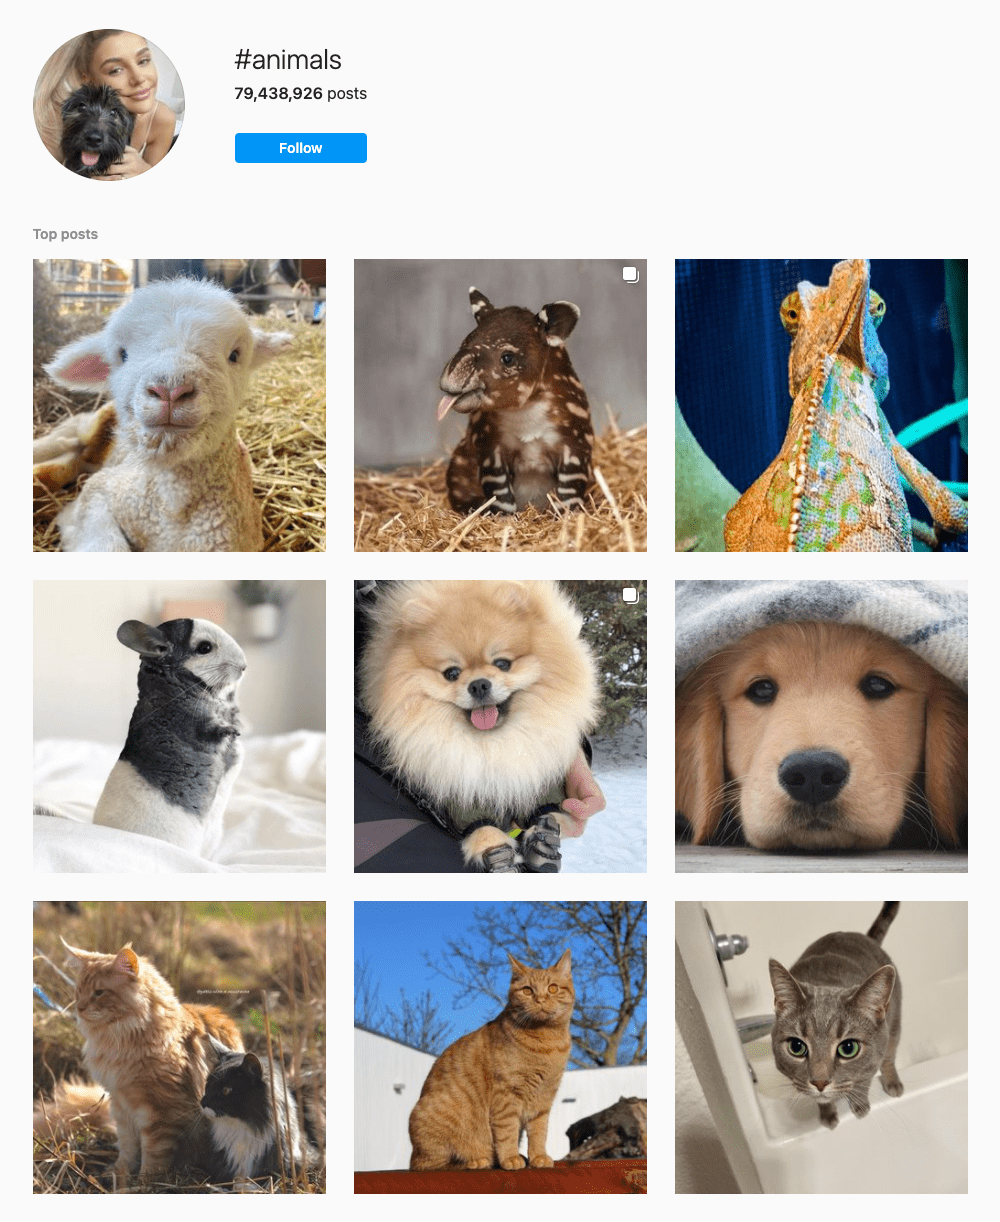 Instagram explore page for the hashtag #animals.